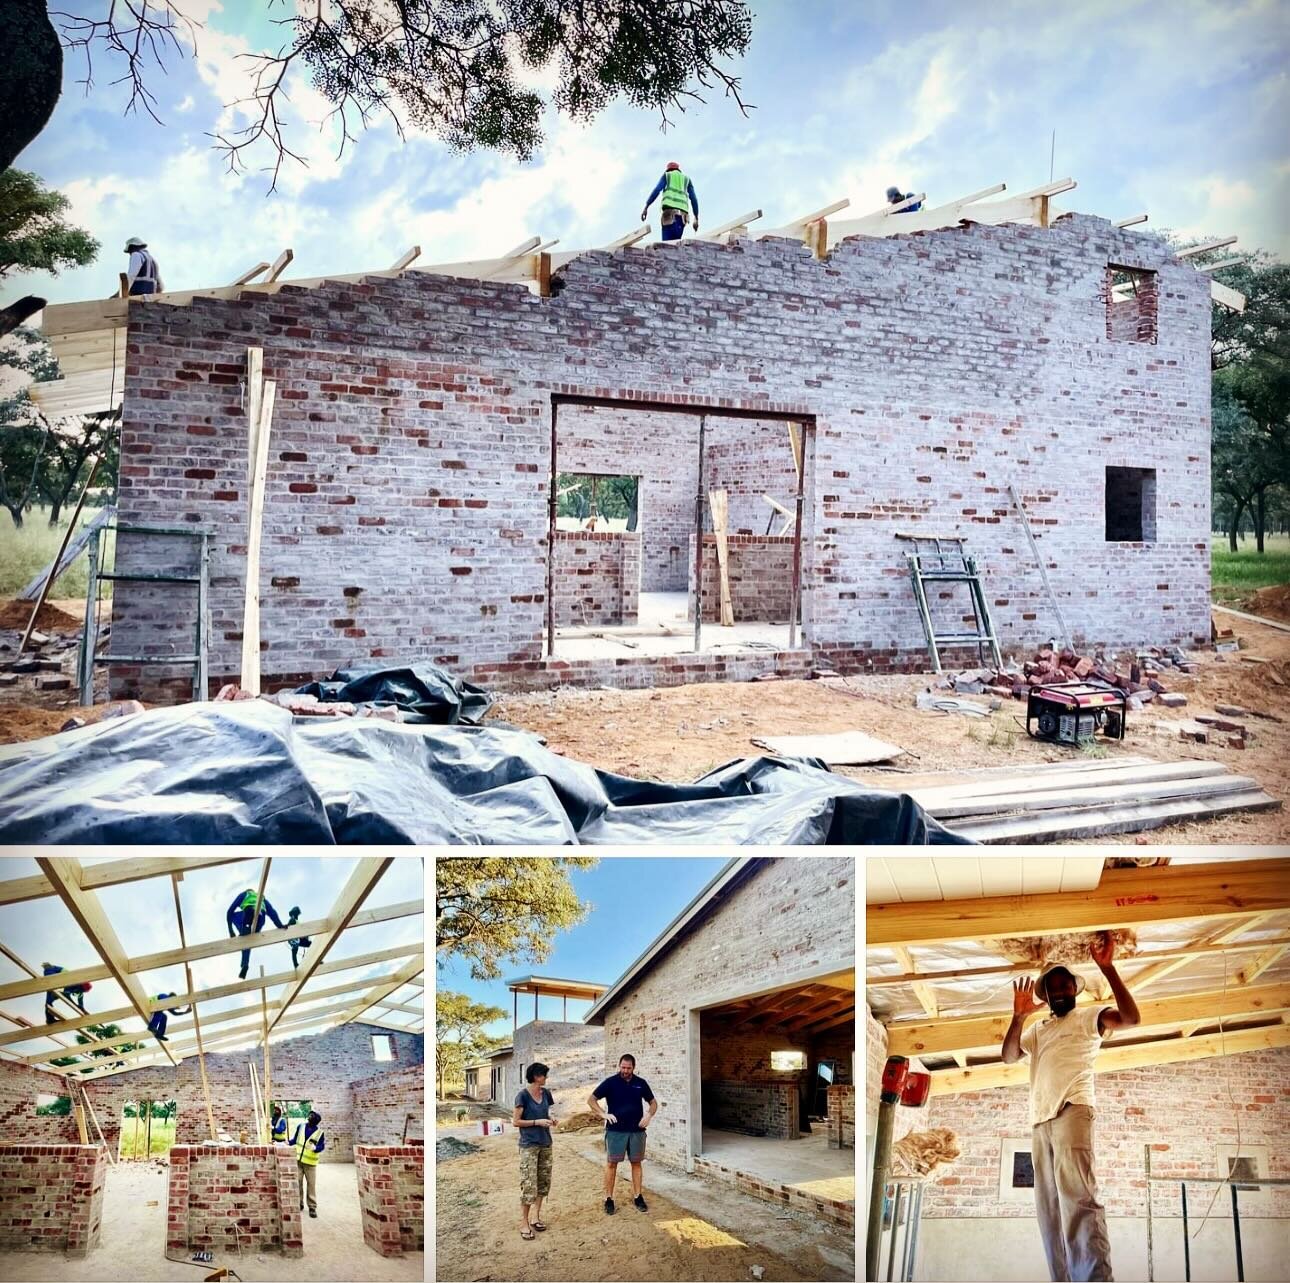 Construction of the Rhino Intensive Care Unit we&rsquo;re building at the CoC&rsquo;s new orphanage and sanctuary is coming along so so nicely. Some smart-feature design considerations are being implemented such as a special sound-dampening substrate